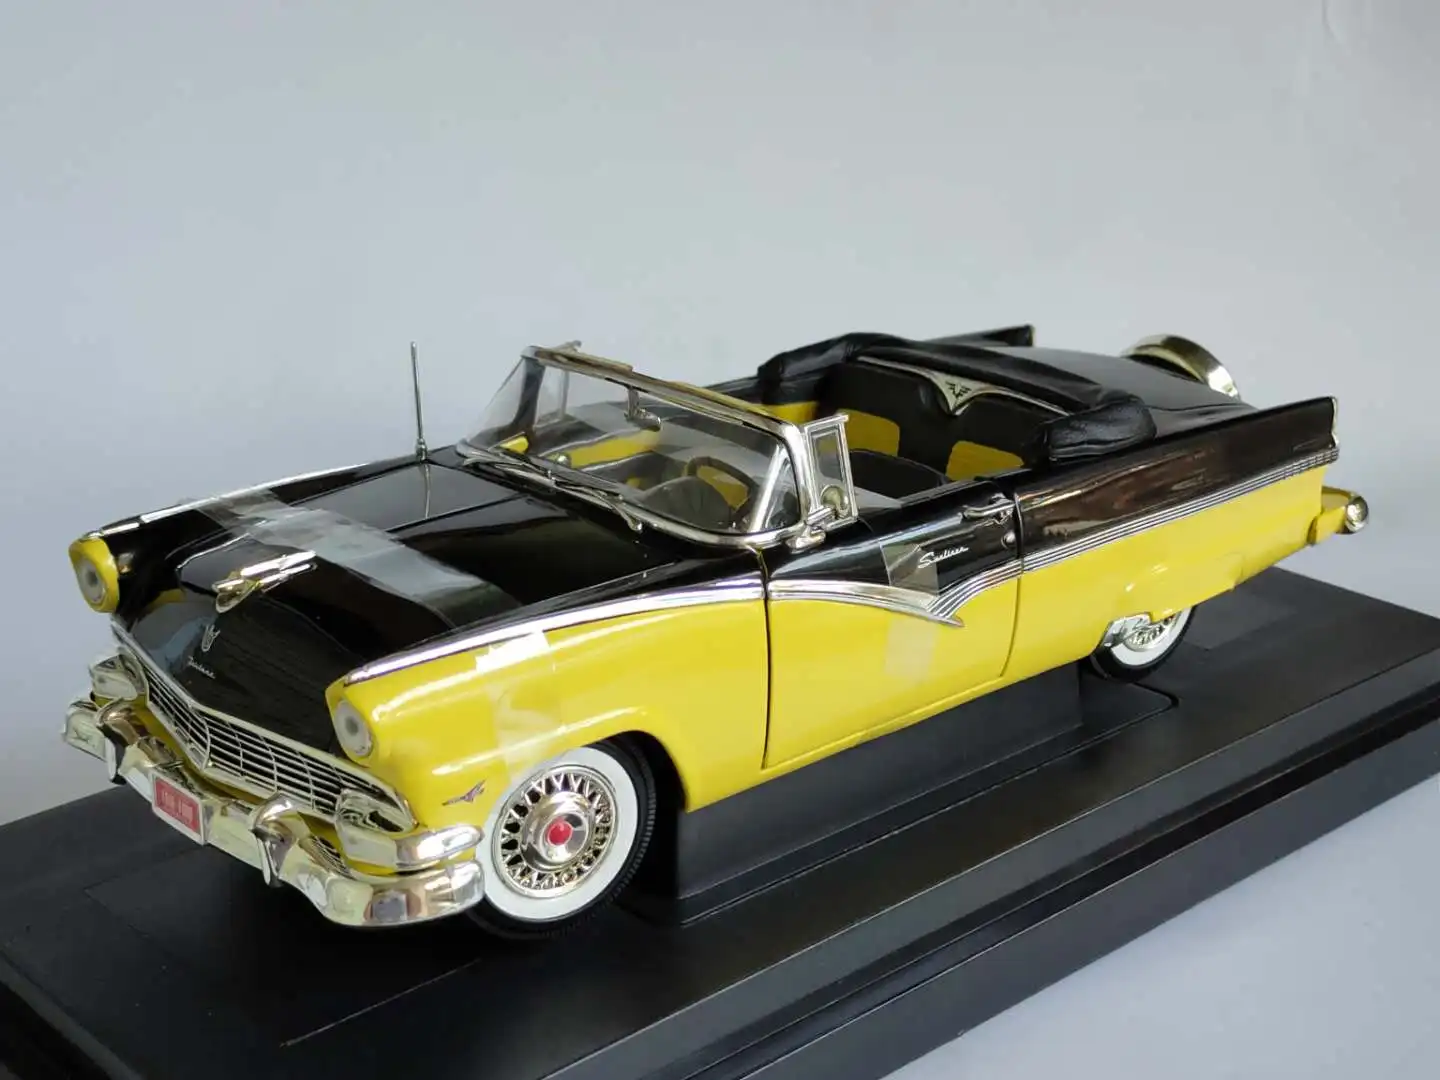 

ERTL 1:18 Ford Fairlane 1956 Vintage Car Alloy Fully Open Simulation Limited Edition Alloy Metal Static Car Model Toy Gift